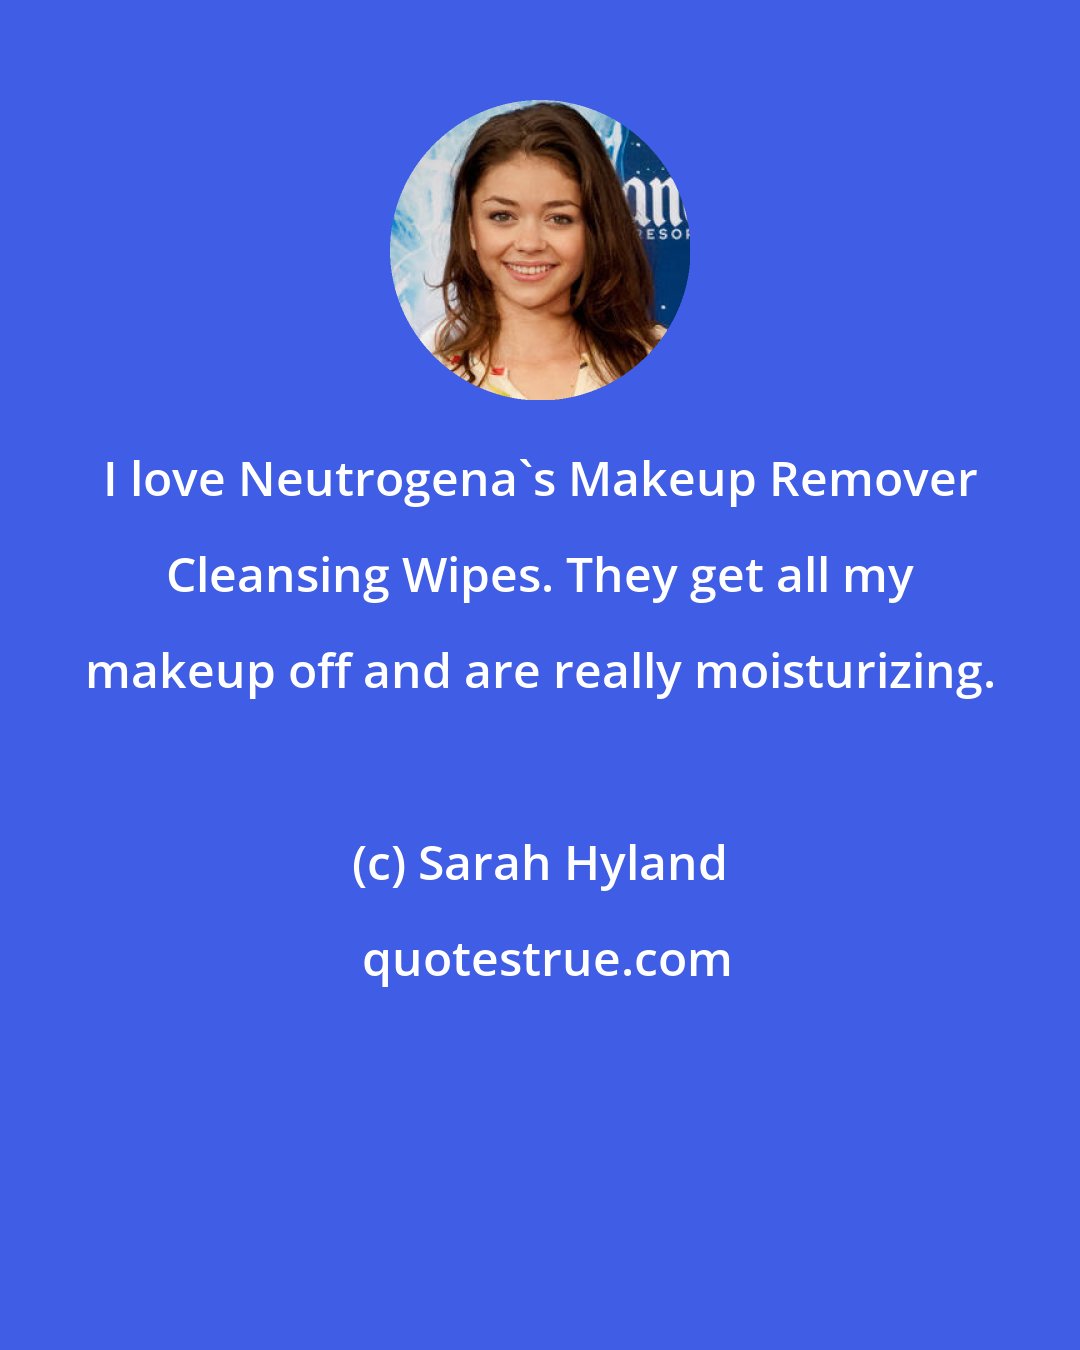 Sarah Hyland: I love Neutrogena's Makeup Remover Cleansing Wipes. They get all my makeup off and are really moisturizing.